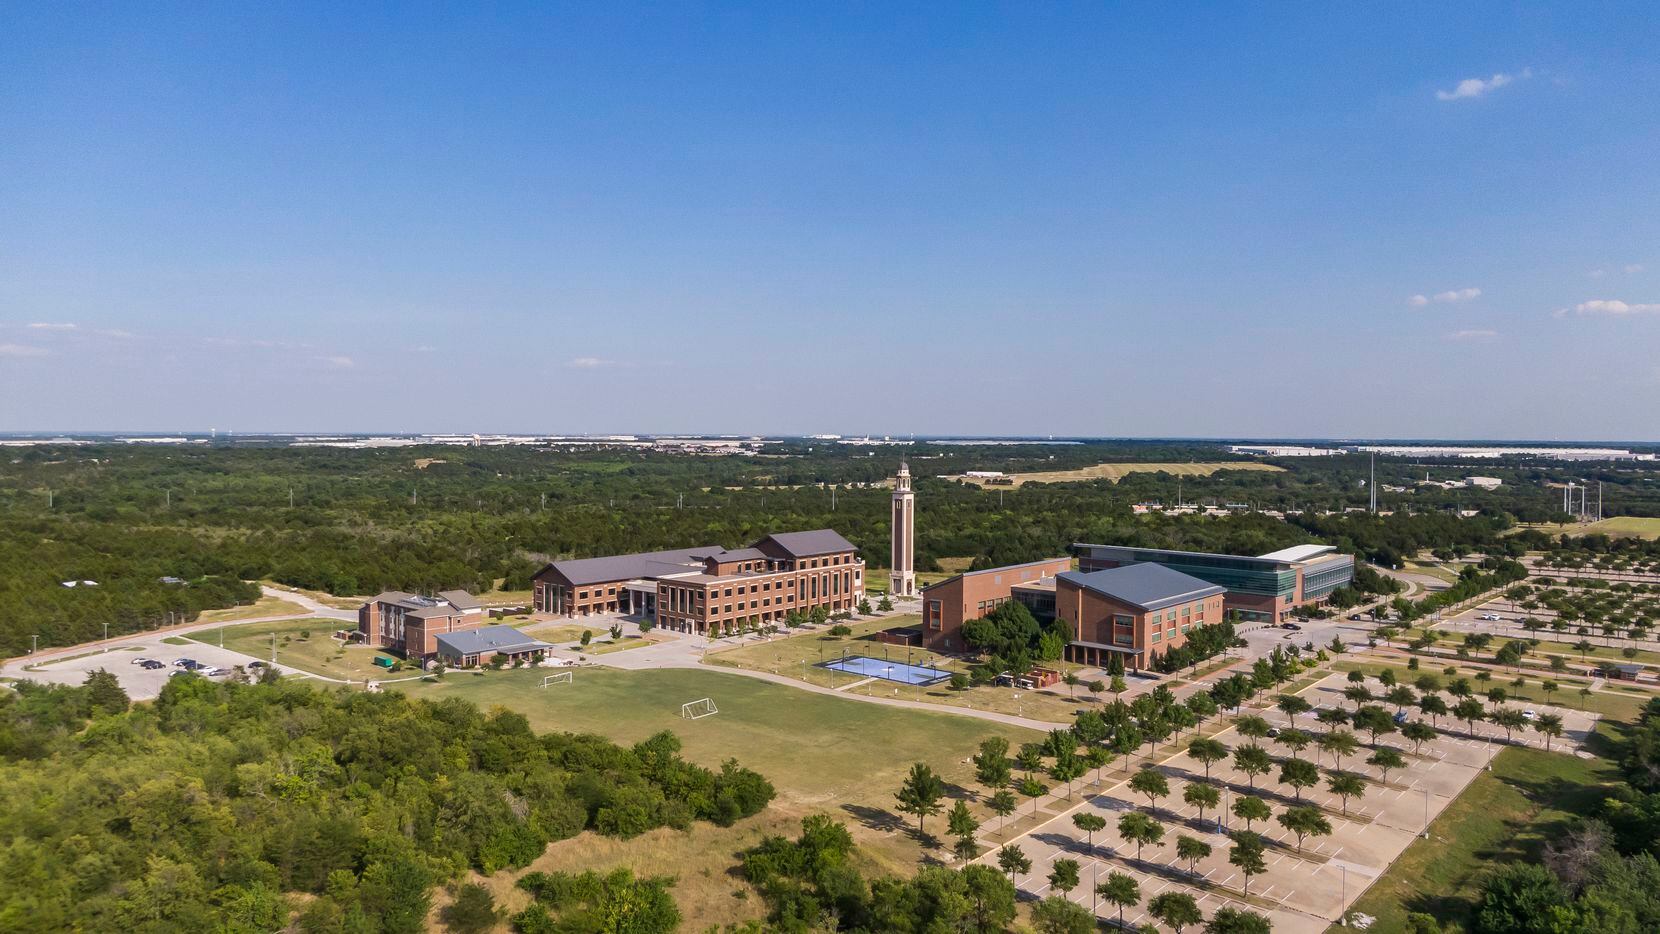 The University of North Texas at Dallas campus is seen in the foreground with several...